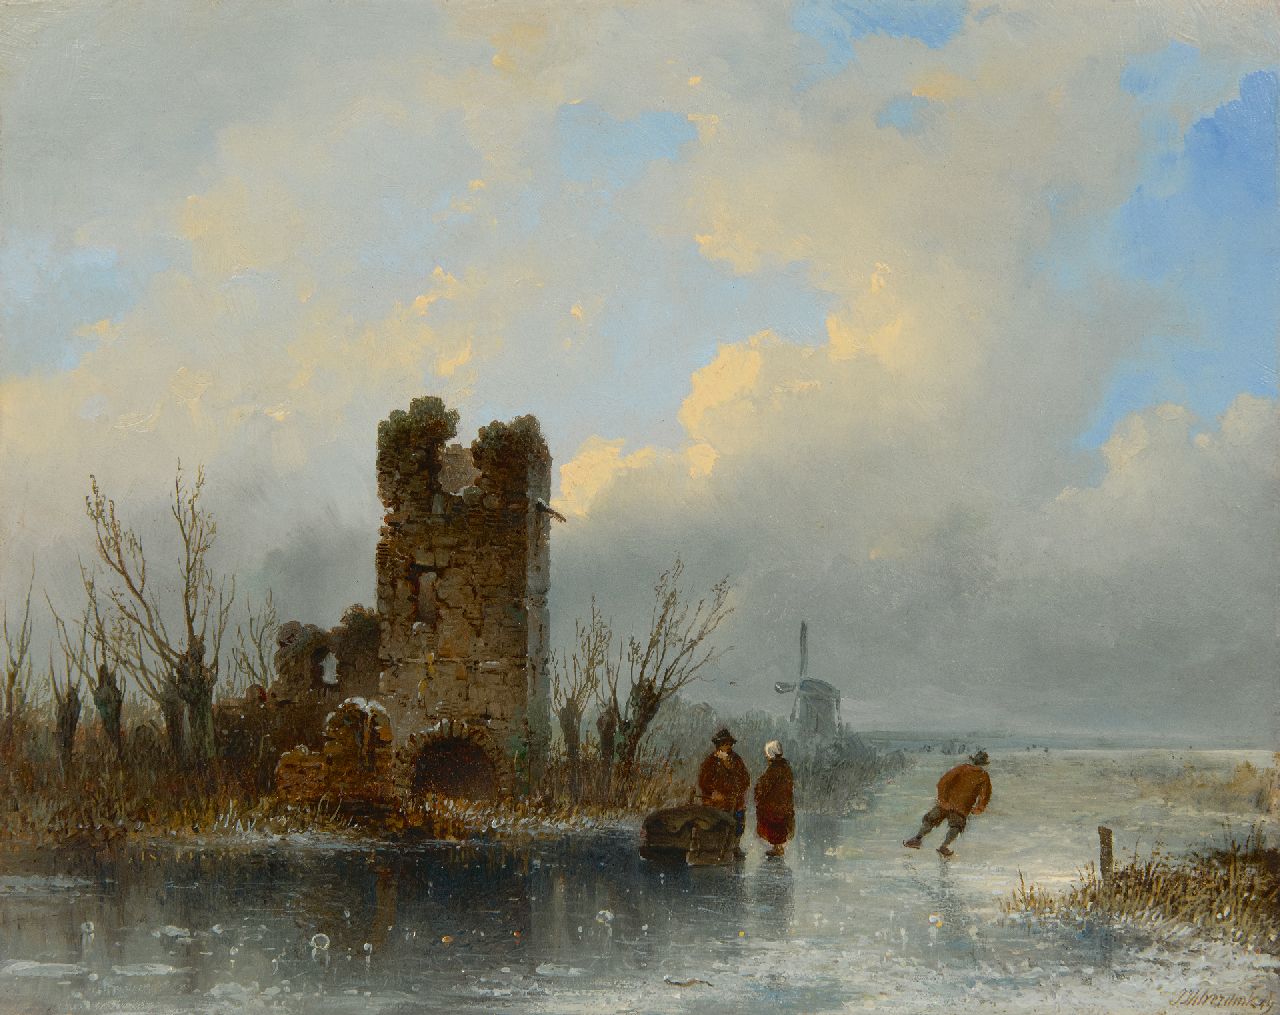 Hilverdink J.  | Johannes Hilverdink, A winter day on the ice, oil on panel 24.7 x 31.3 cm, signed l.r. and dated '49